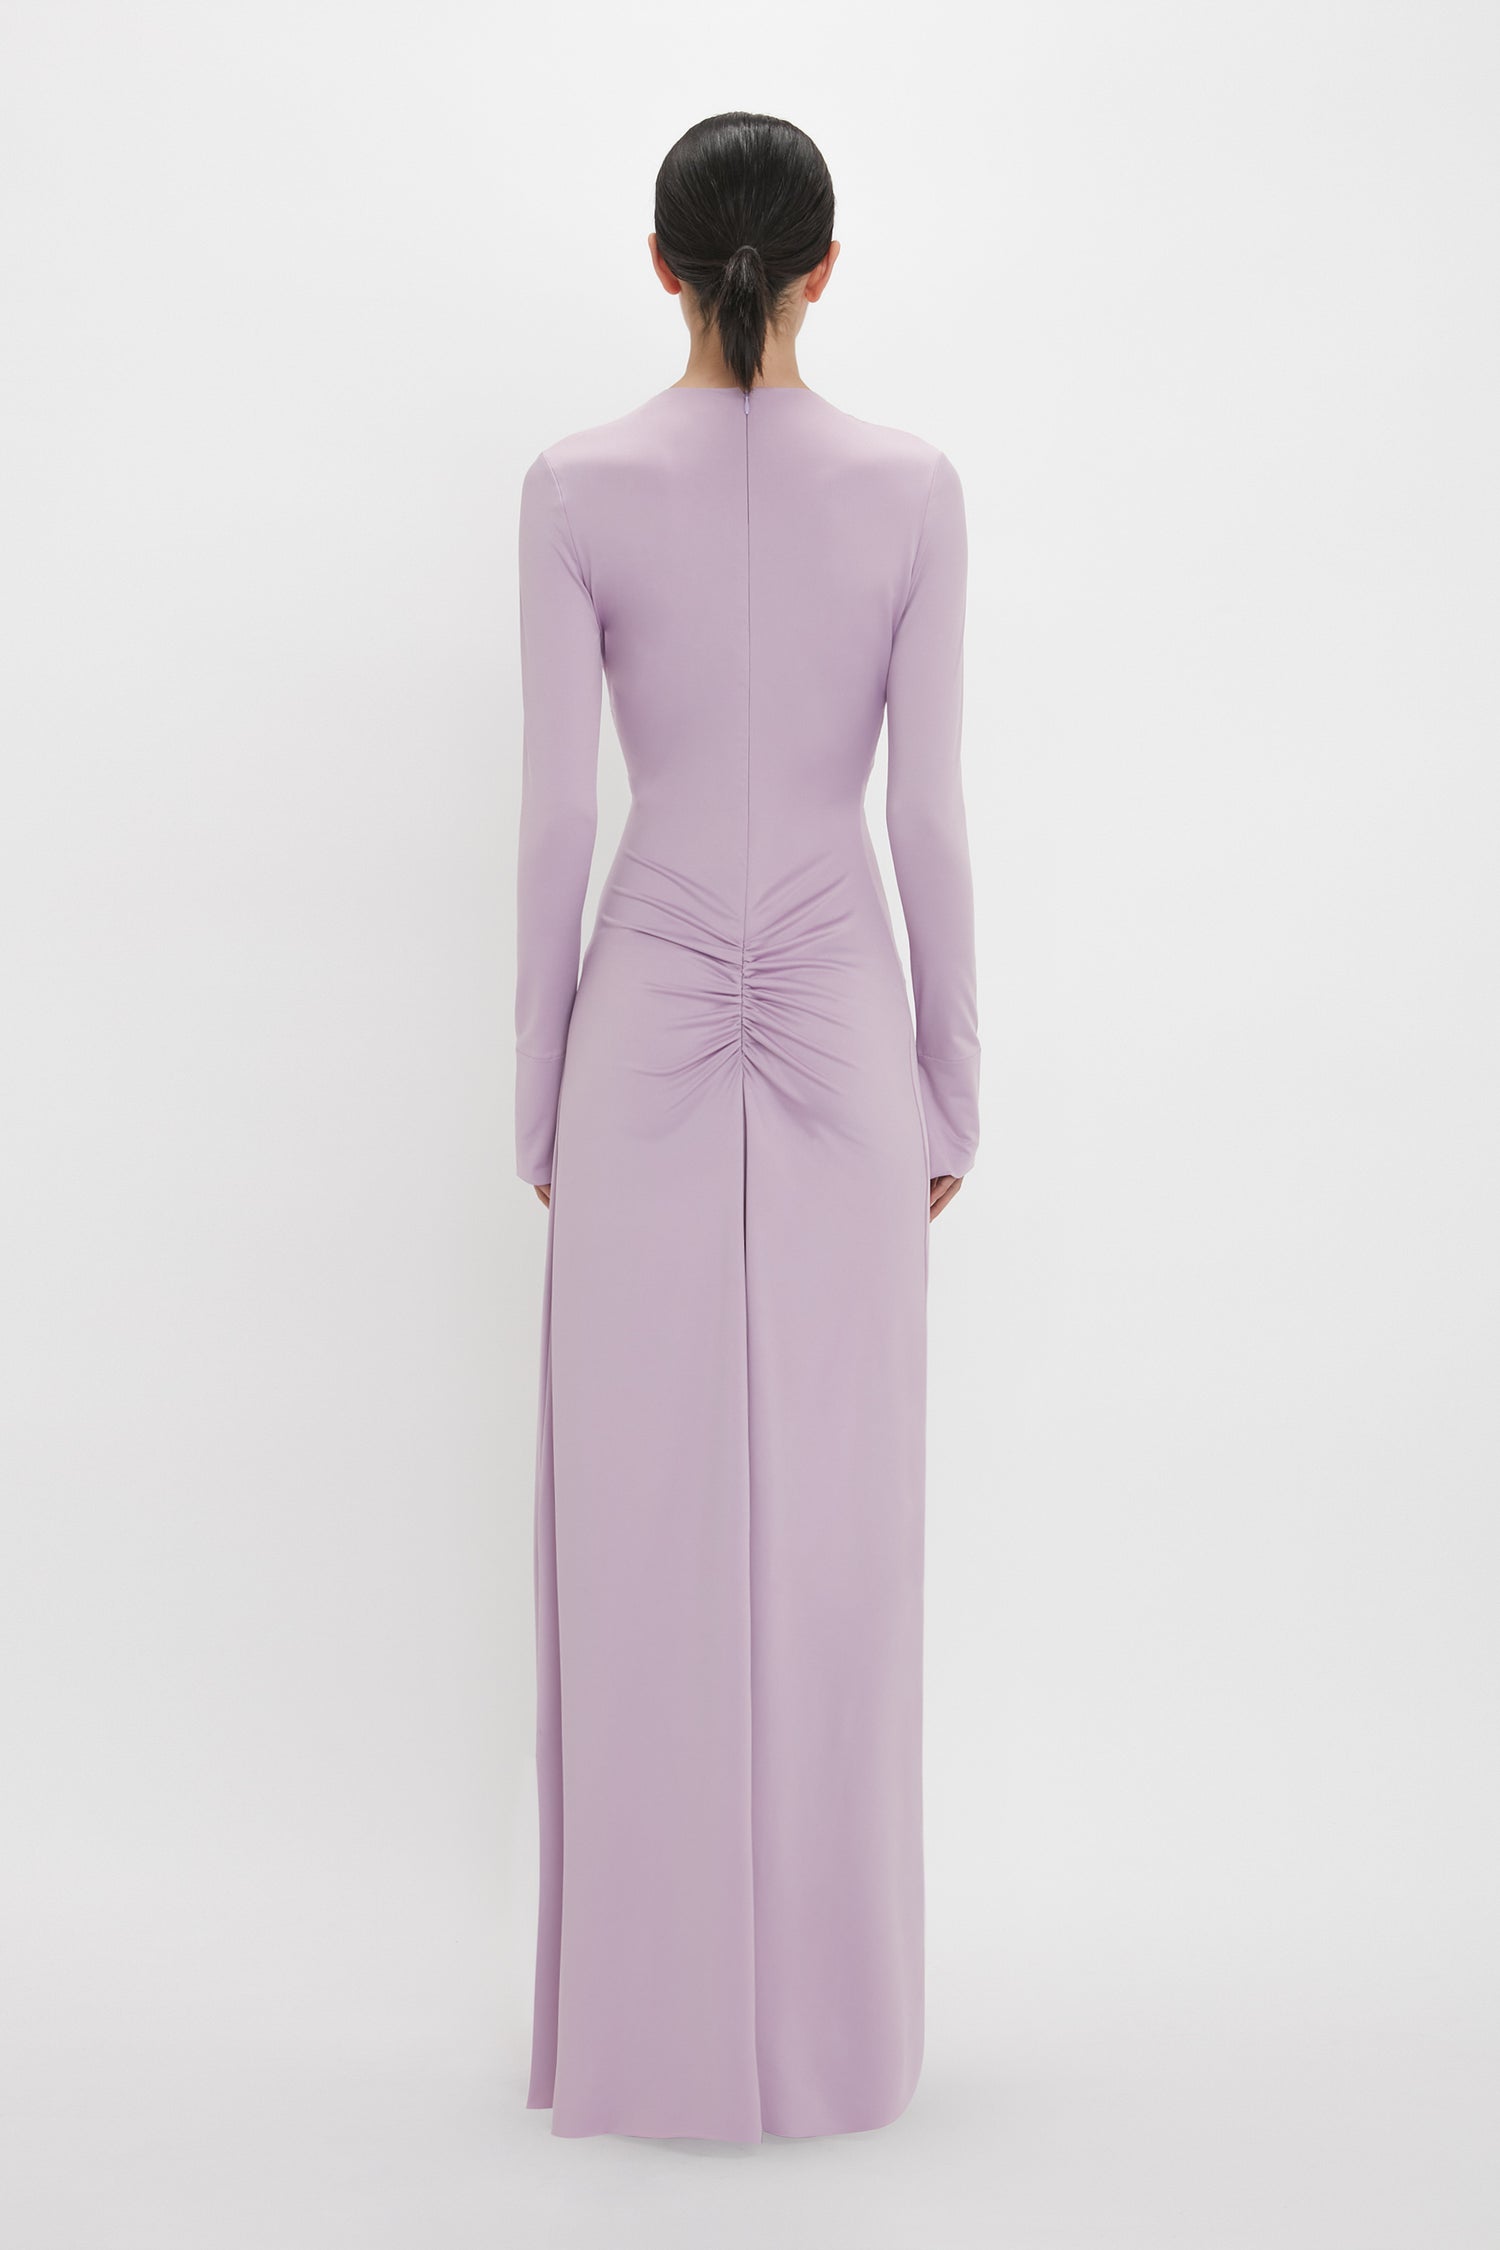 A person with dark hair in a low bun is wearing a long-sleeved, floor-length, light purple Victoria Beckham Ruched Detail Floor-Length Gown In Petunia with gathered detail at the waist, standing with their back to the camera, exuding understated glamour.